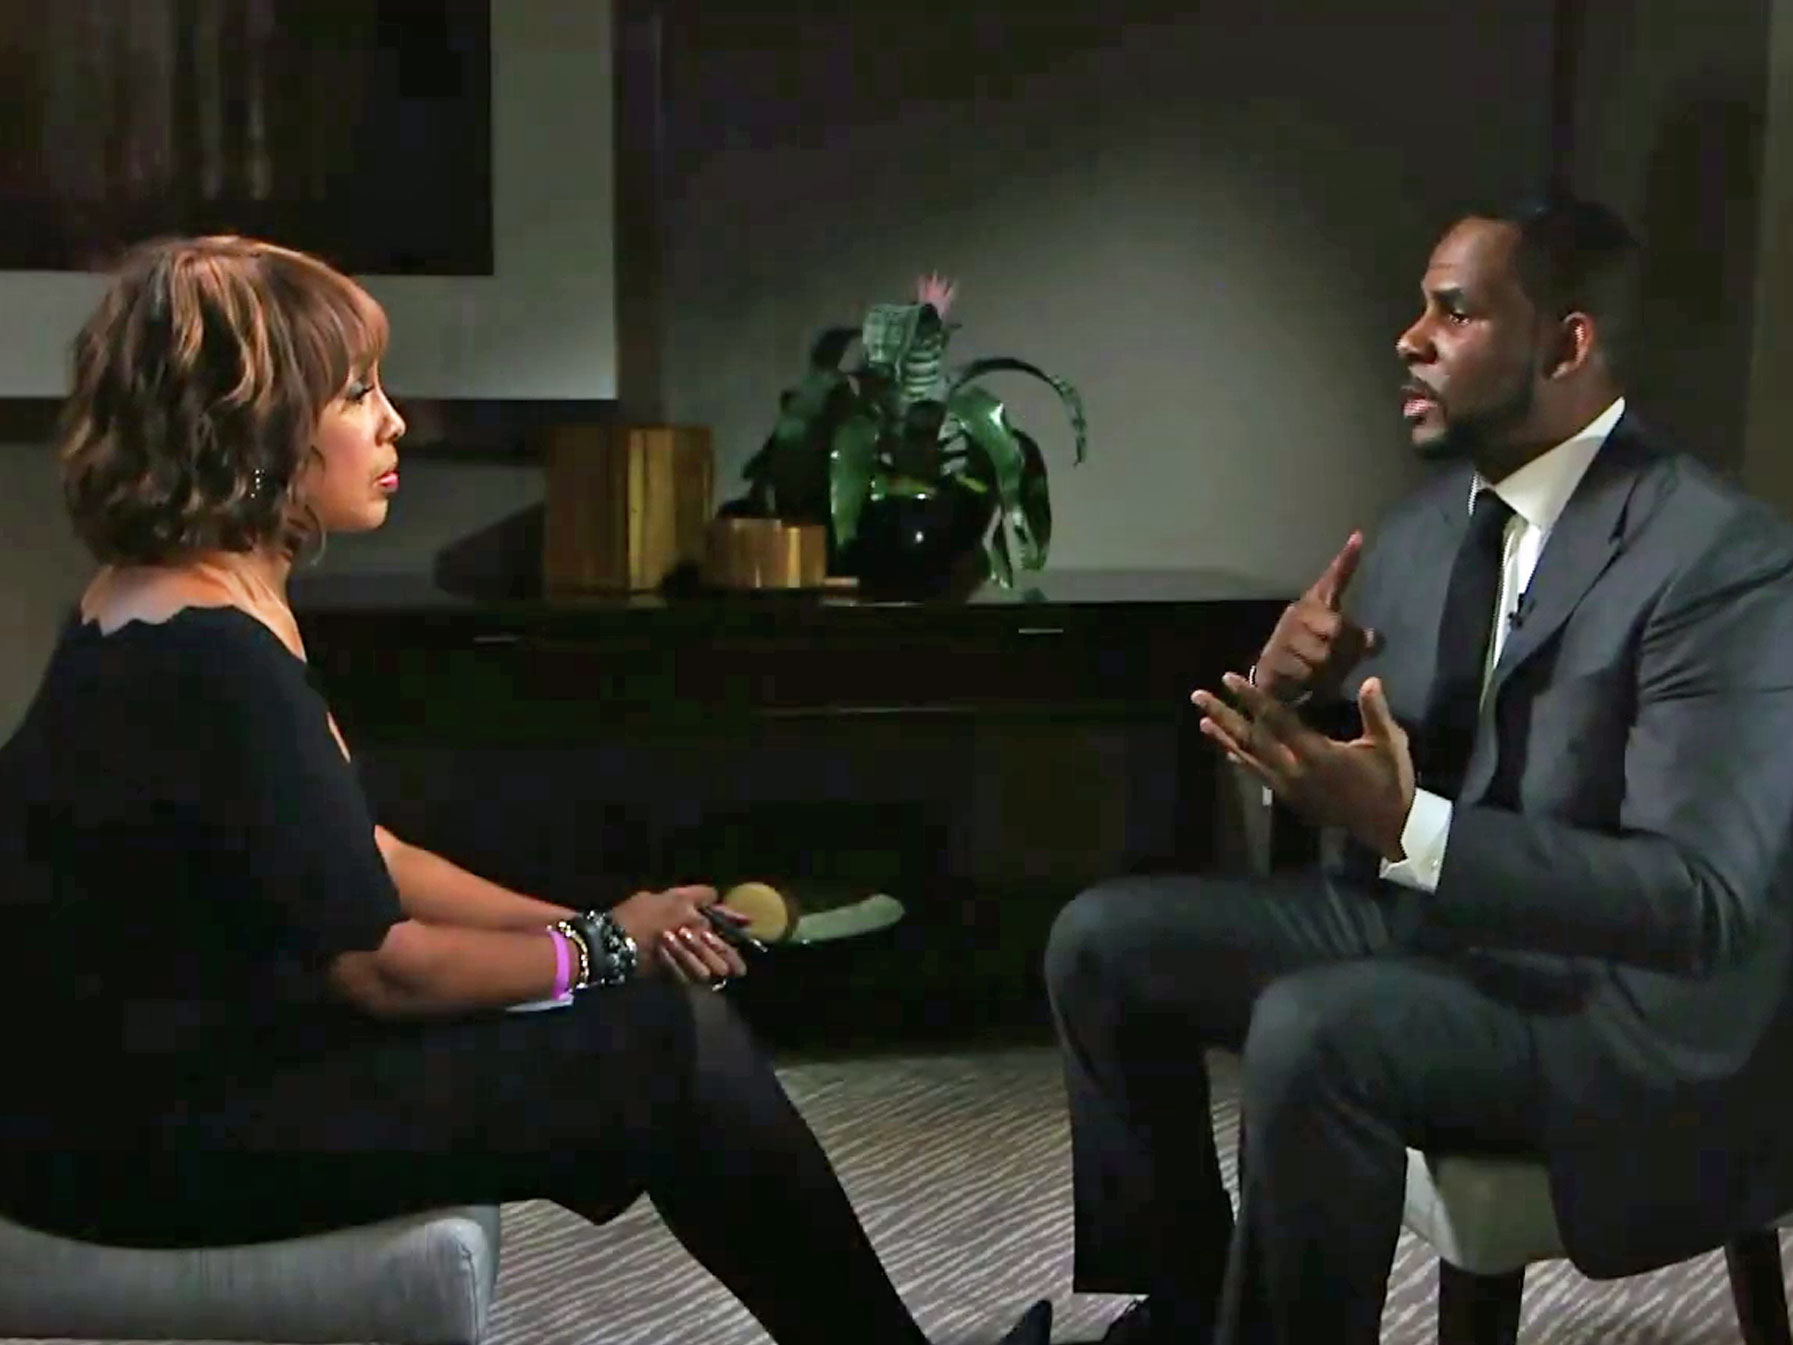 R. Kelly gave his first major interview in years to Gayle King on "...